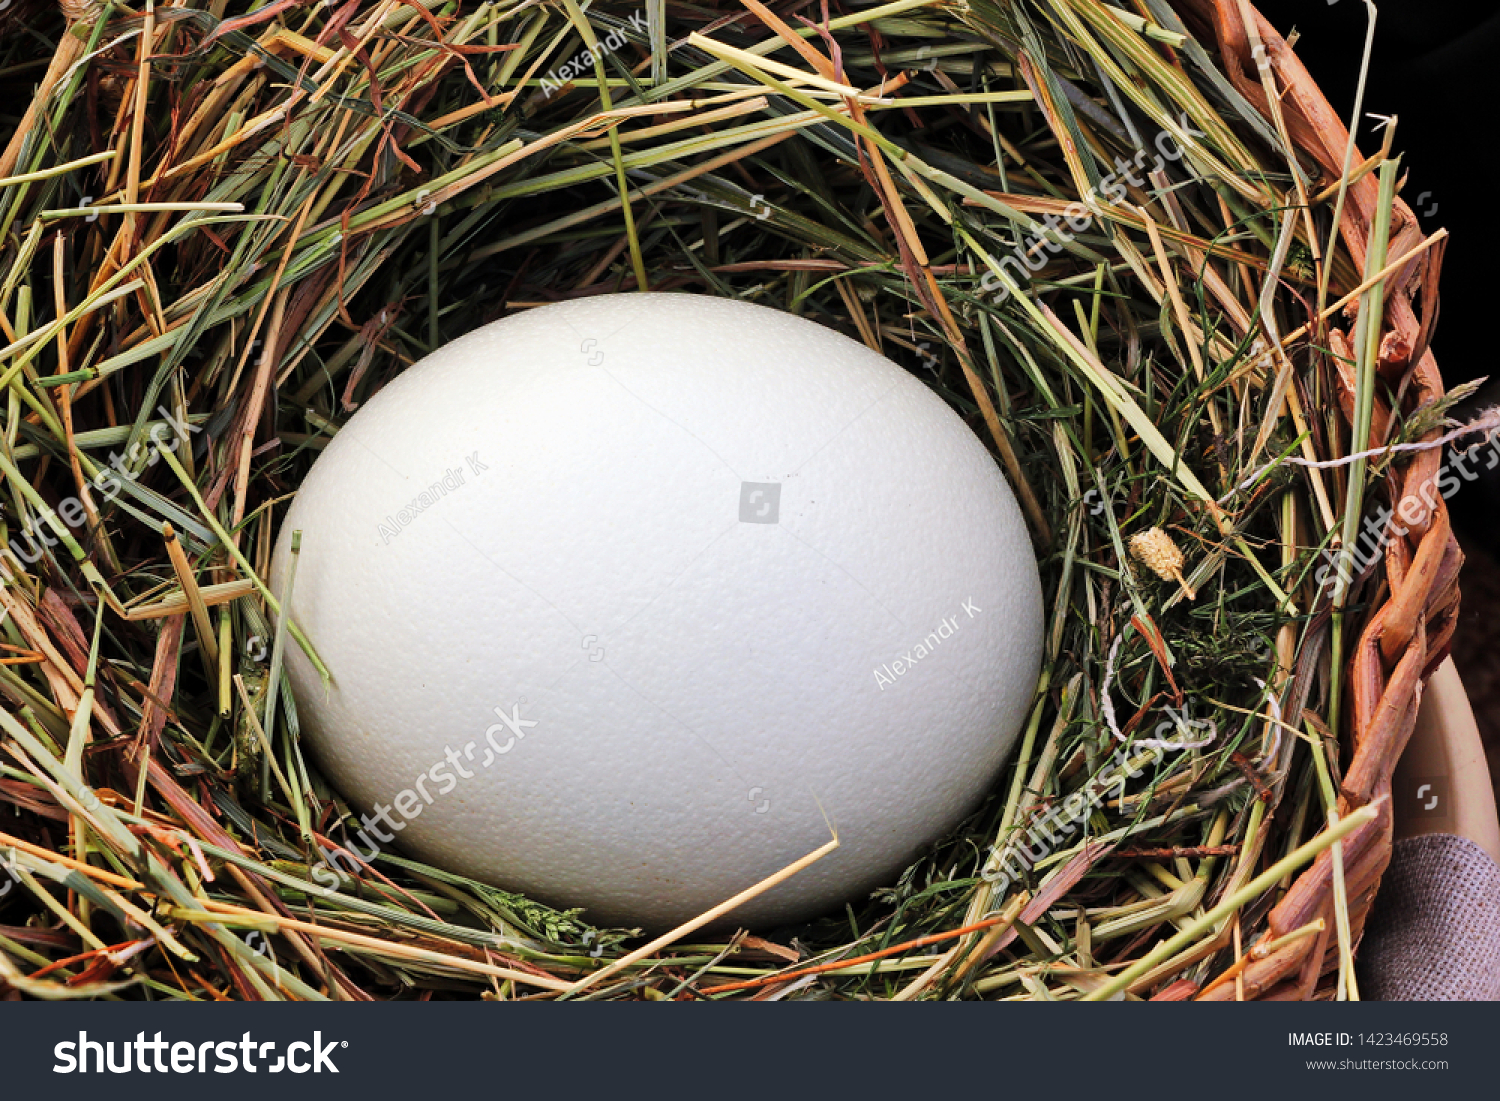 large, white ostrich egg in a wicker basket #1423469558